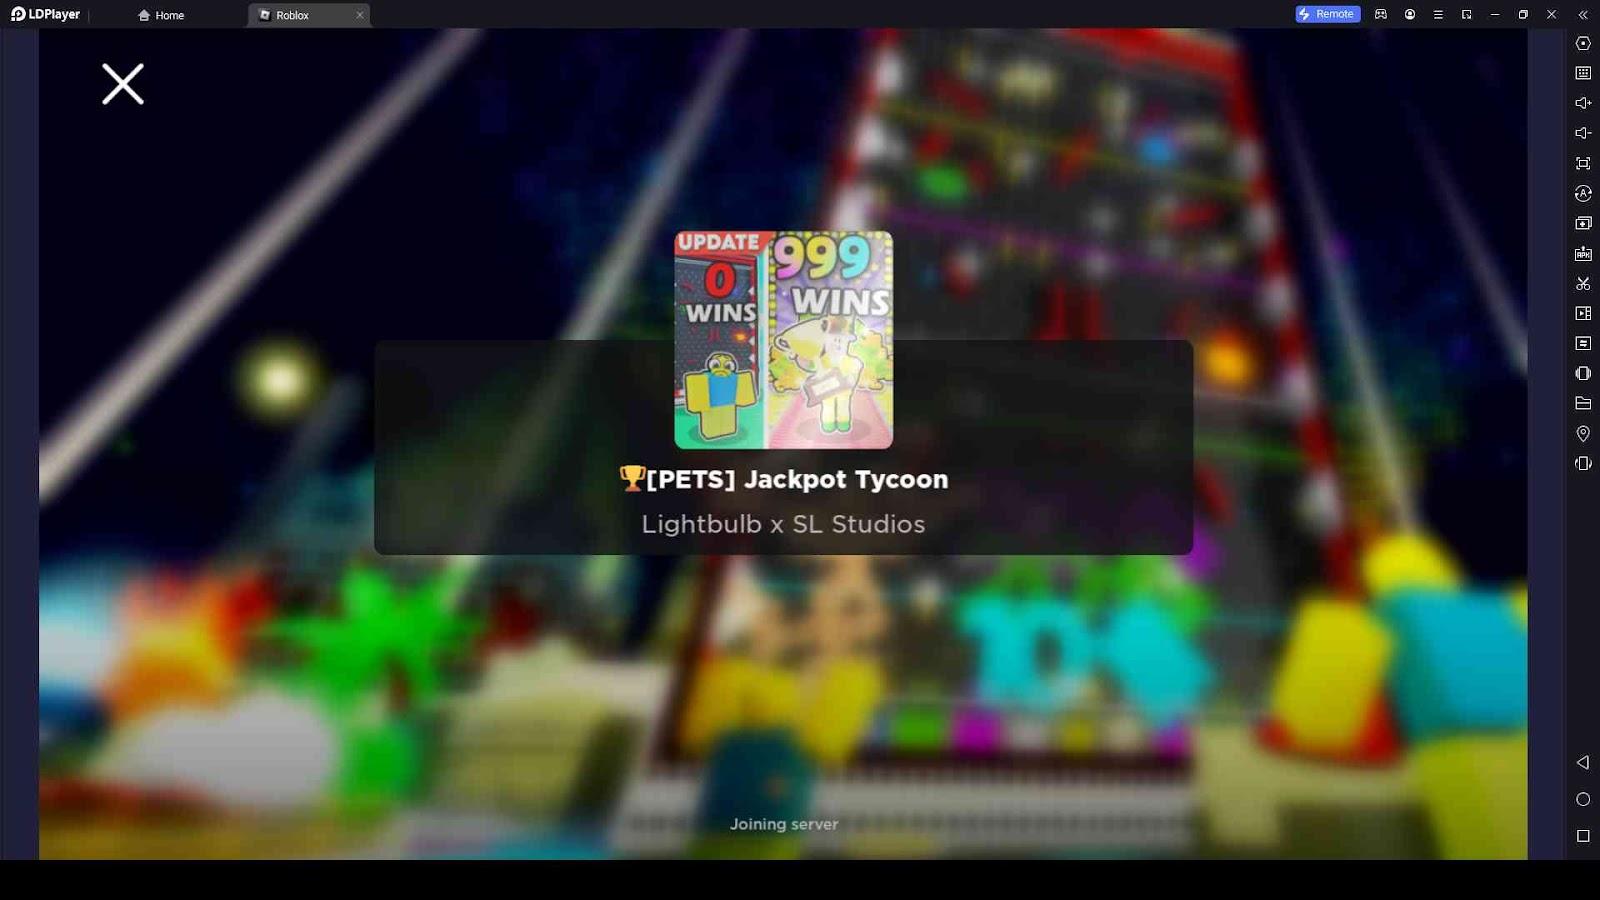 Ultra Power Tycoon Codes - May 2023! - Droid Gamers